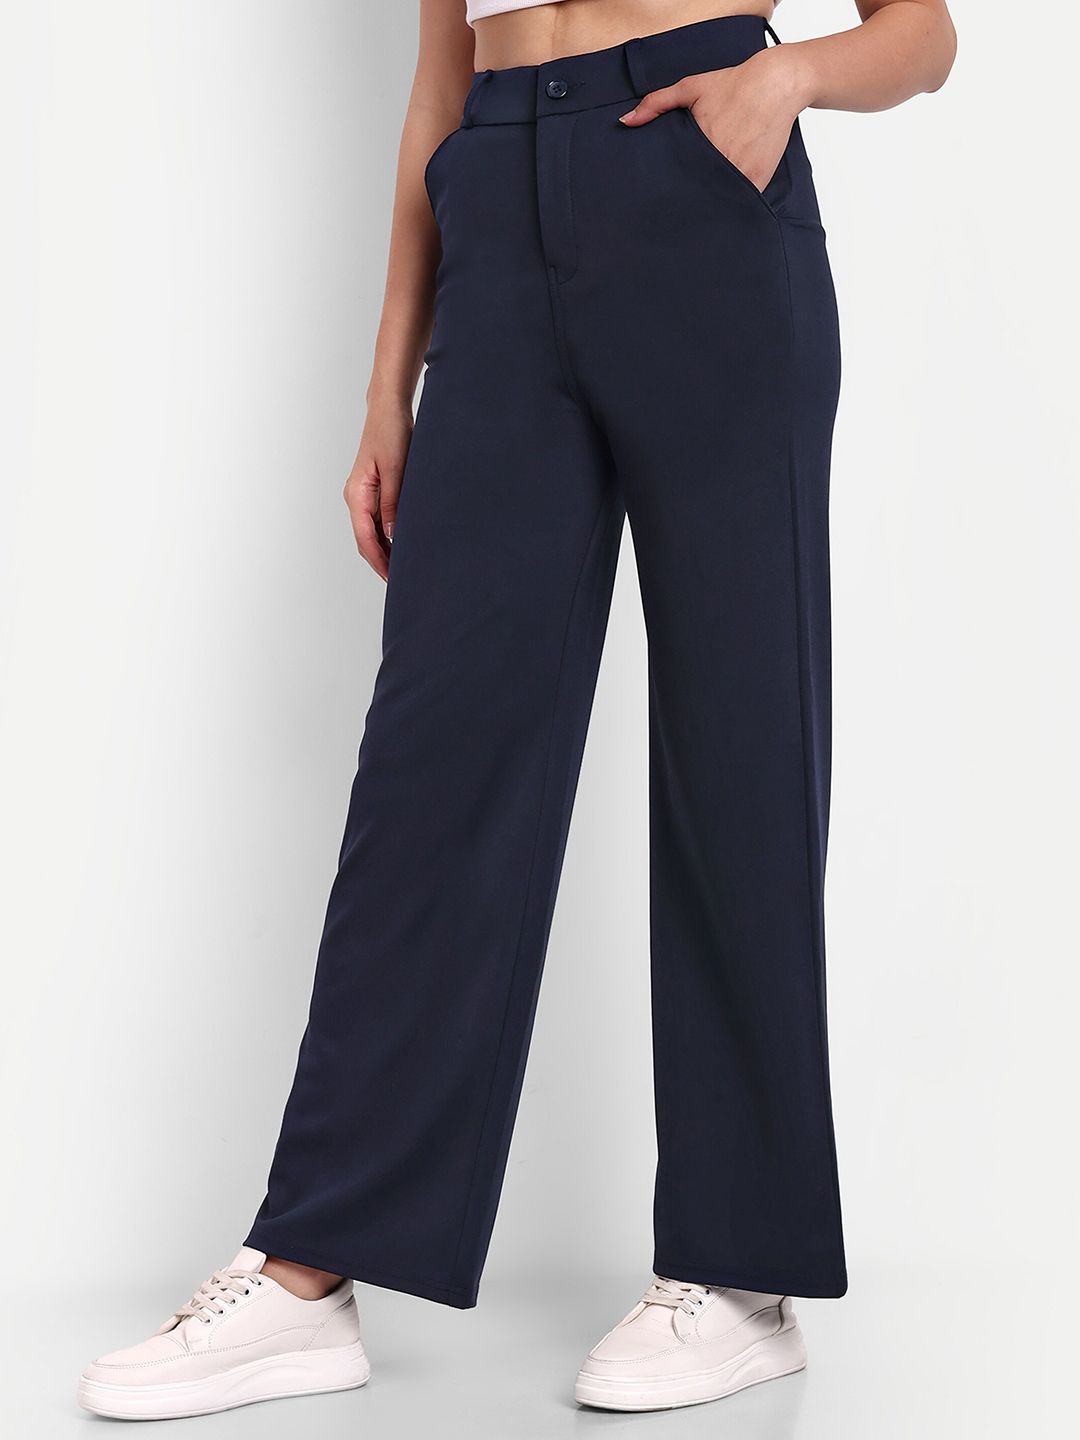 Next One Smart Loose fit High-Rise Easy Wash Formal Knitted Regular Trousers Price in India